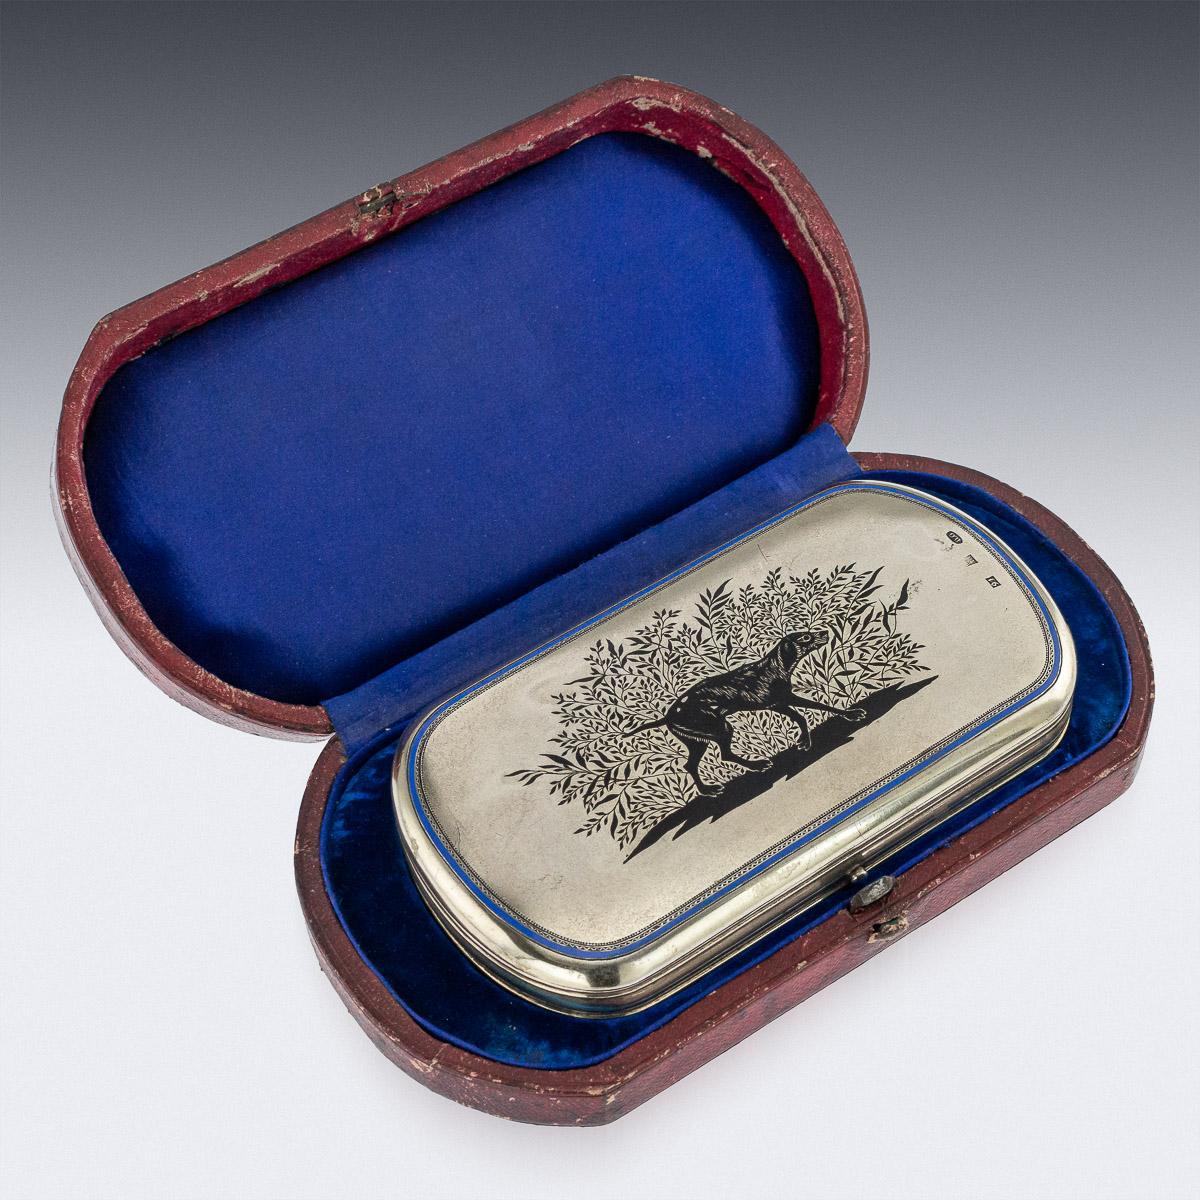 Antique 19th century Imperial Russian large solid silver and enamel cigar case, of rounded rectangular form, the surface applied with black enamel depicting a hunting hound amongst bushes, the reverse lid engraved with an elaborate cartooche within